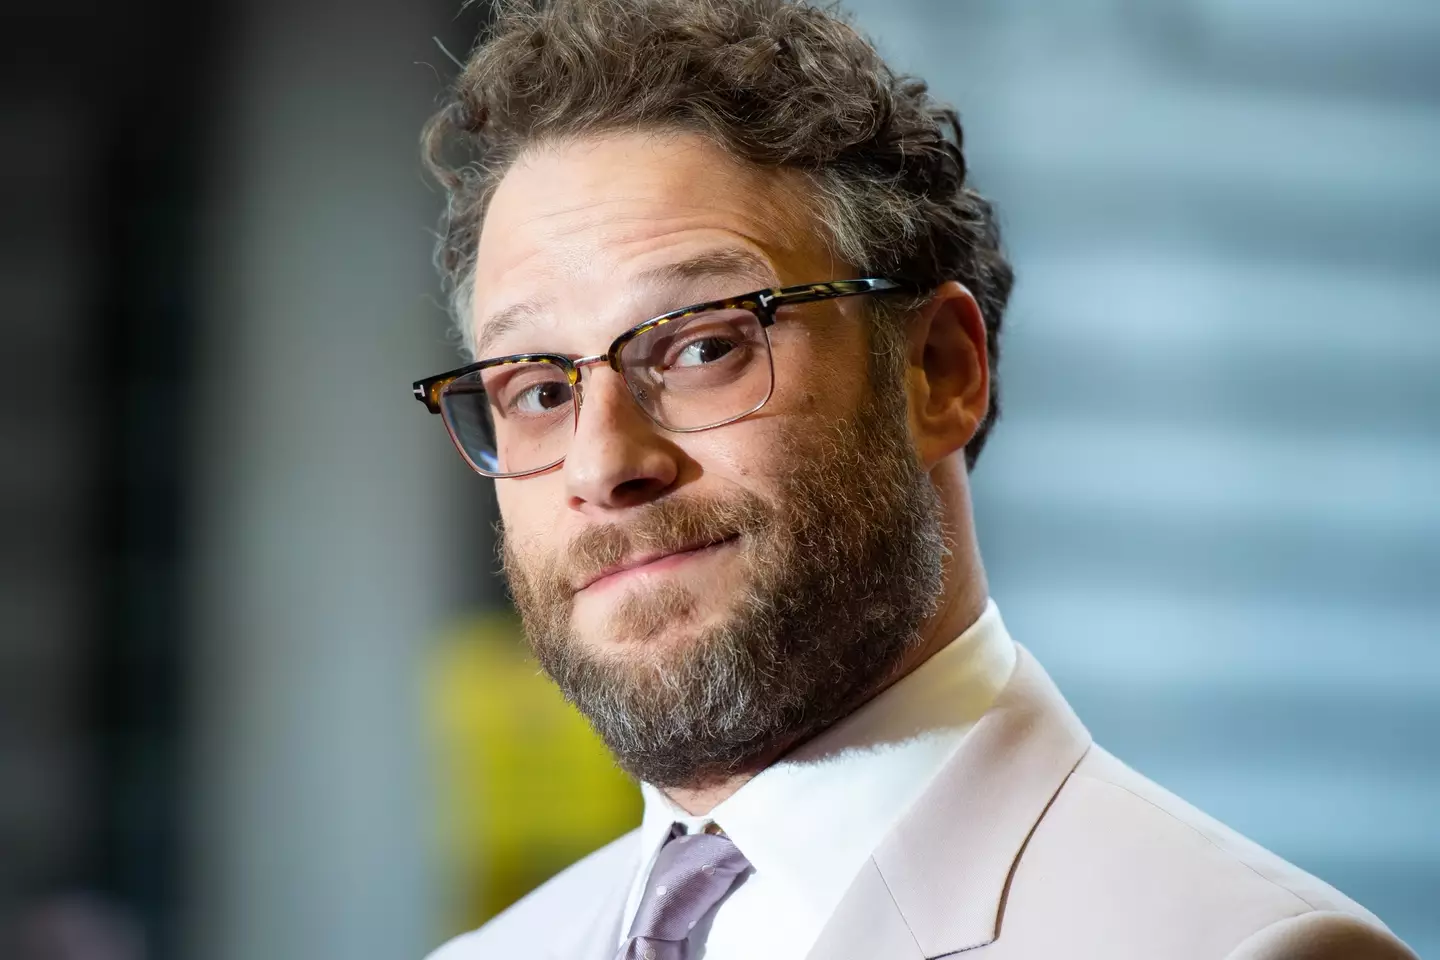 Luckily for the fan, Seth Rogen got in contact before he could take his cigar smoking act any further.